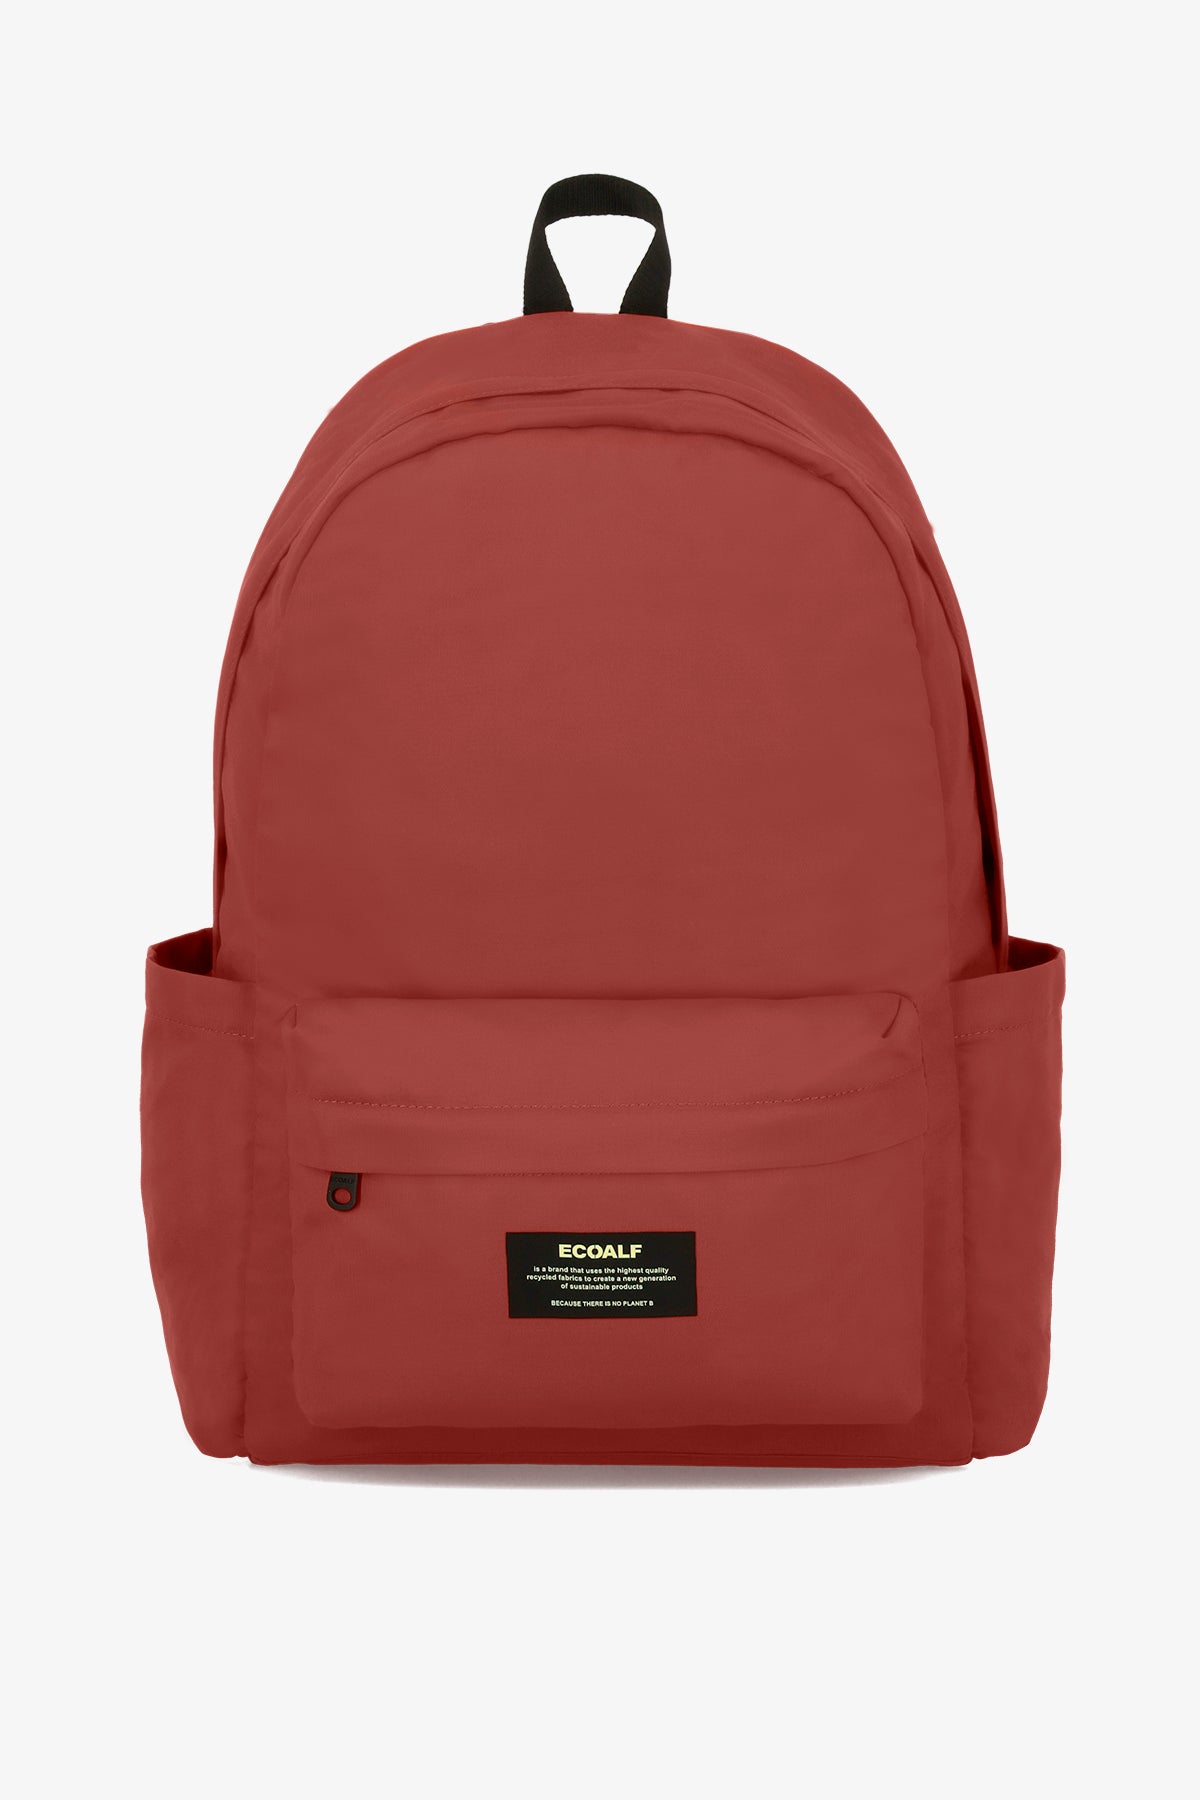 CHILLY RED BASIL BACKPACK